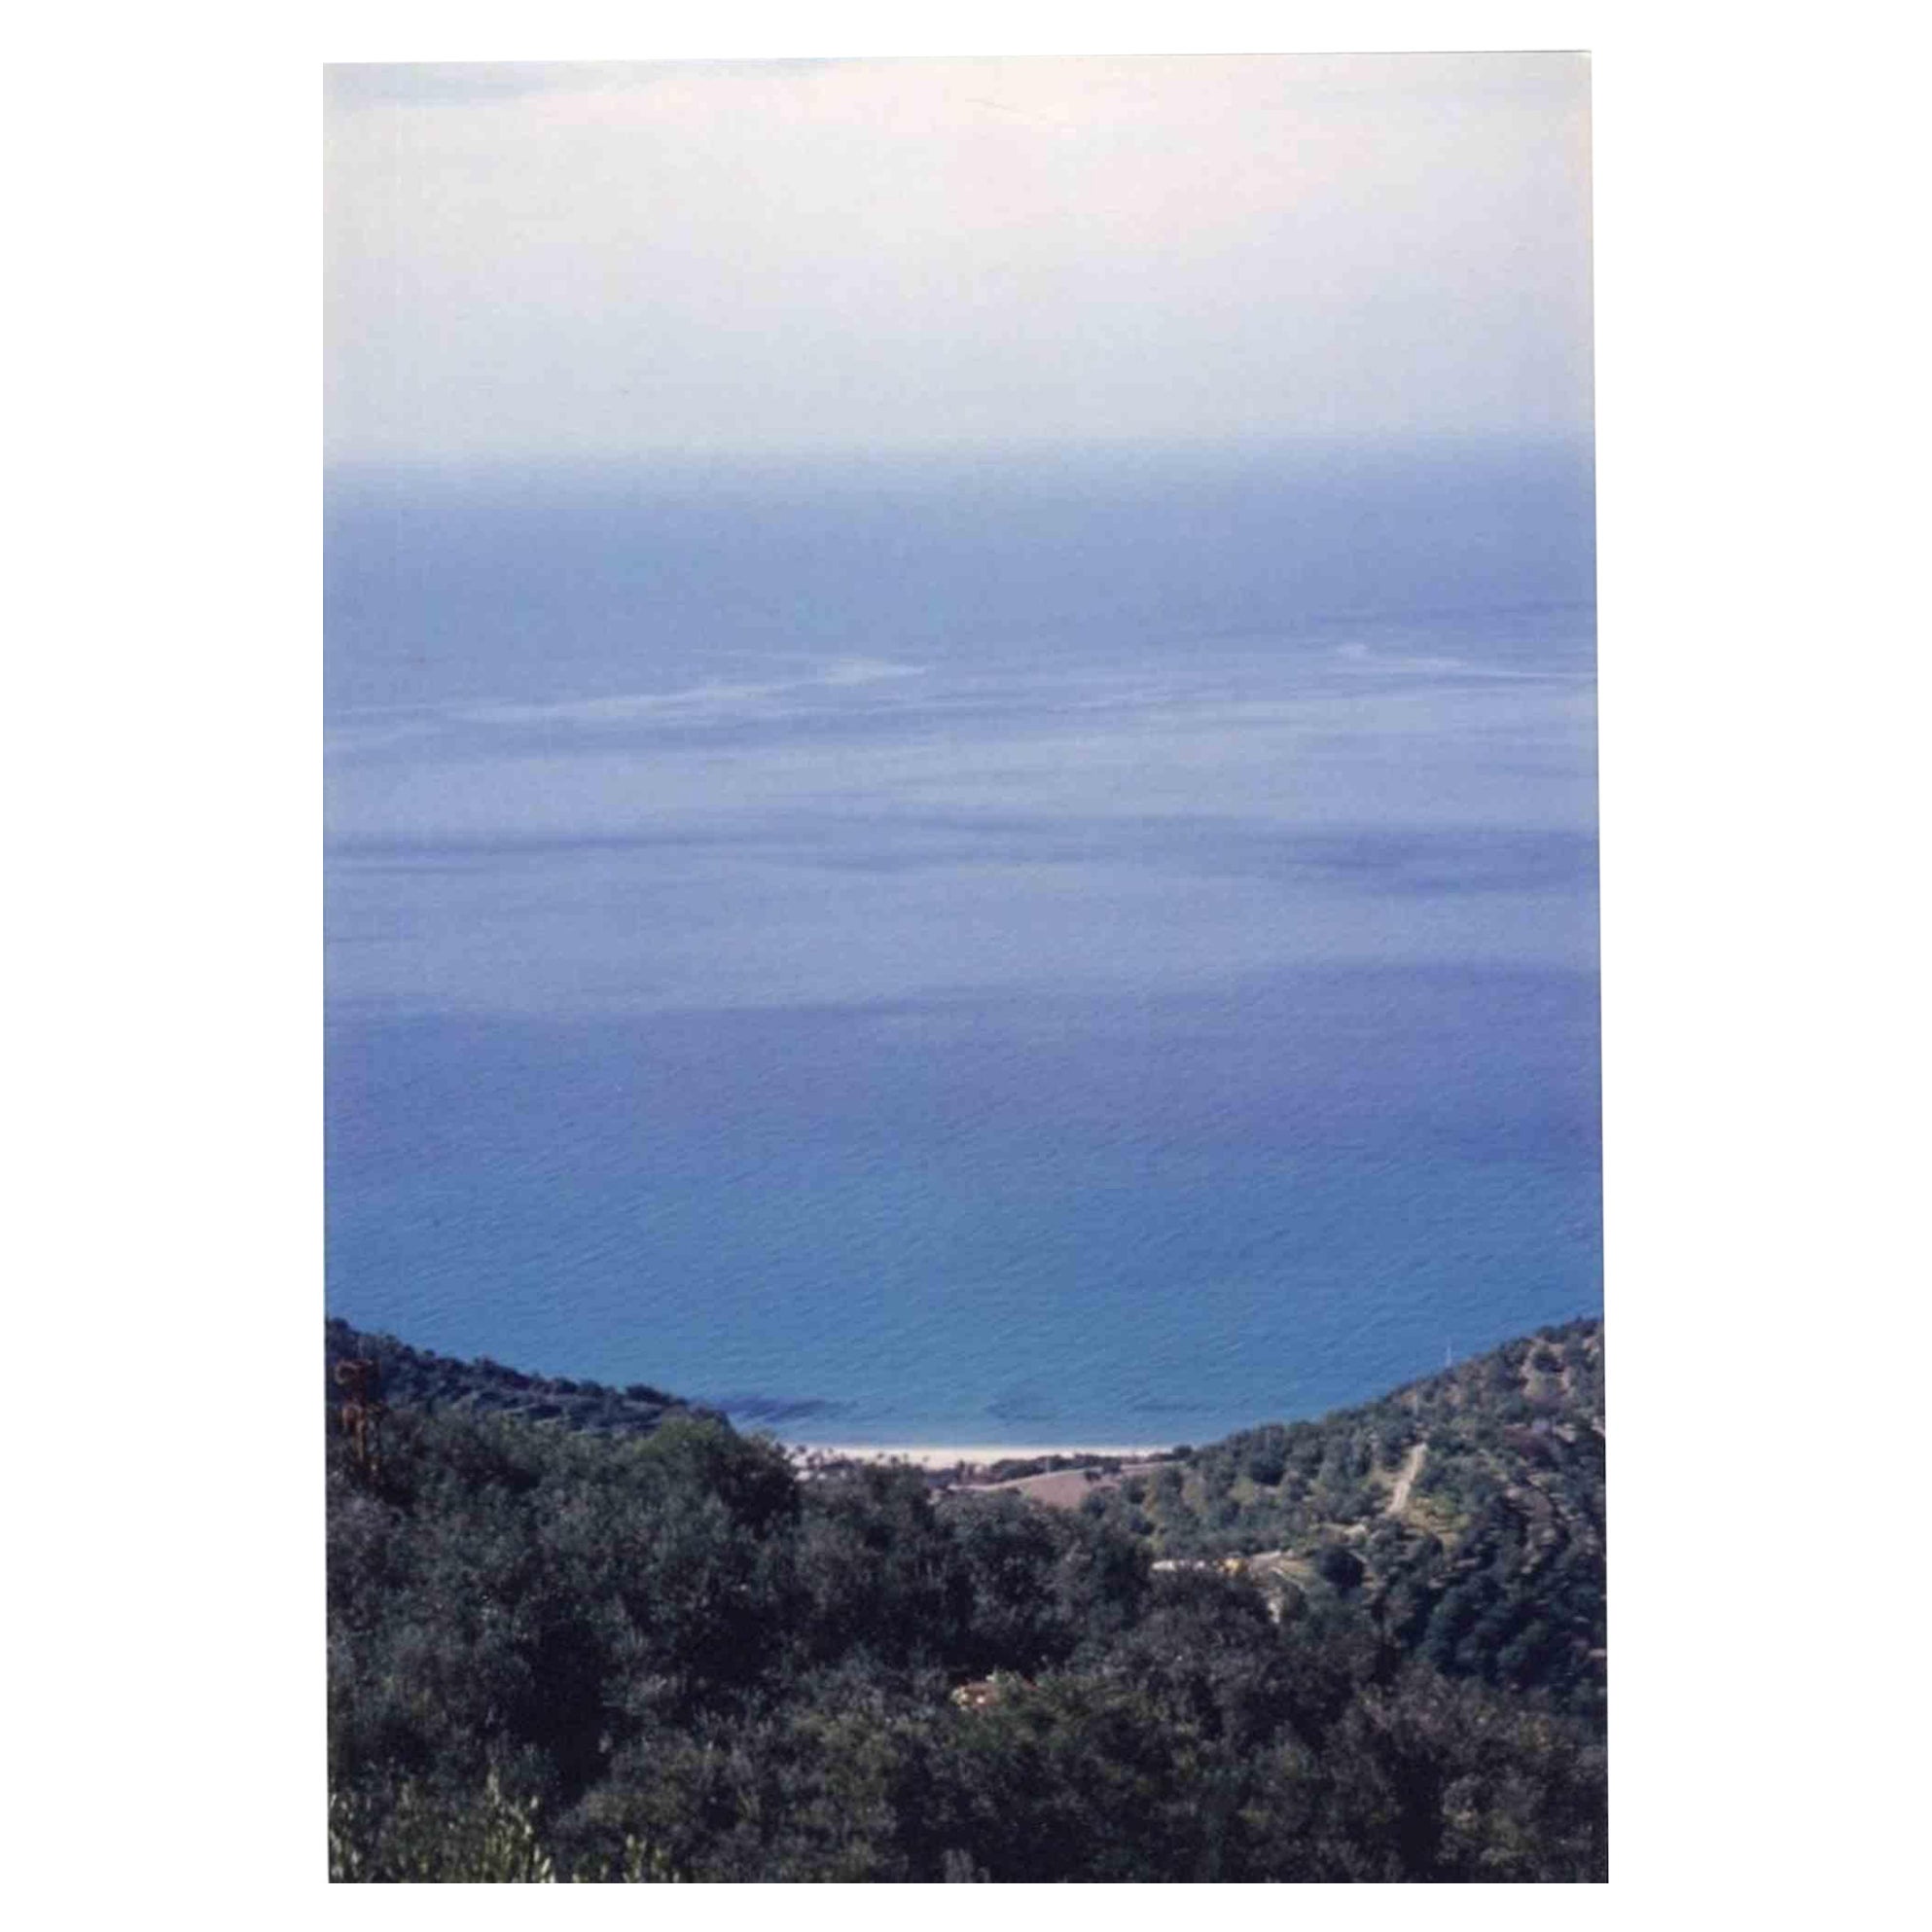 Unknown Landscape Photograph - Reportage from Albania - Lukova - Vintage Photograph - Late 1970s